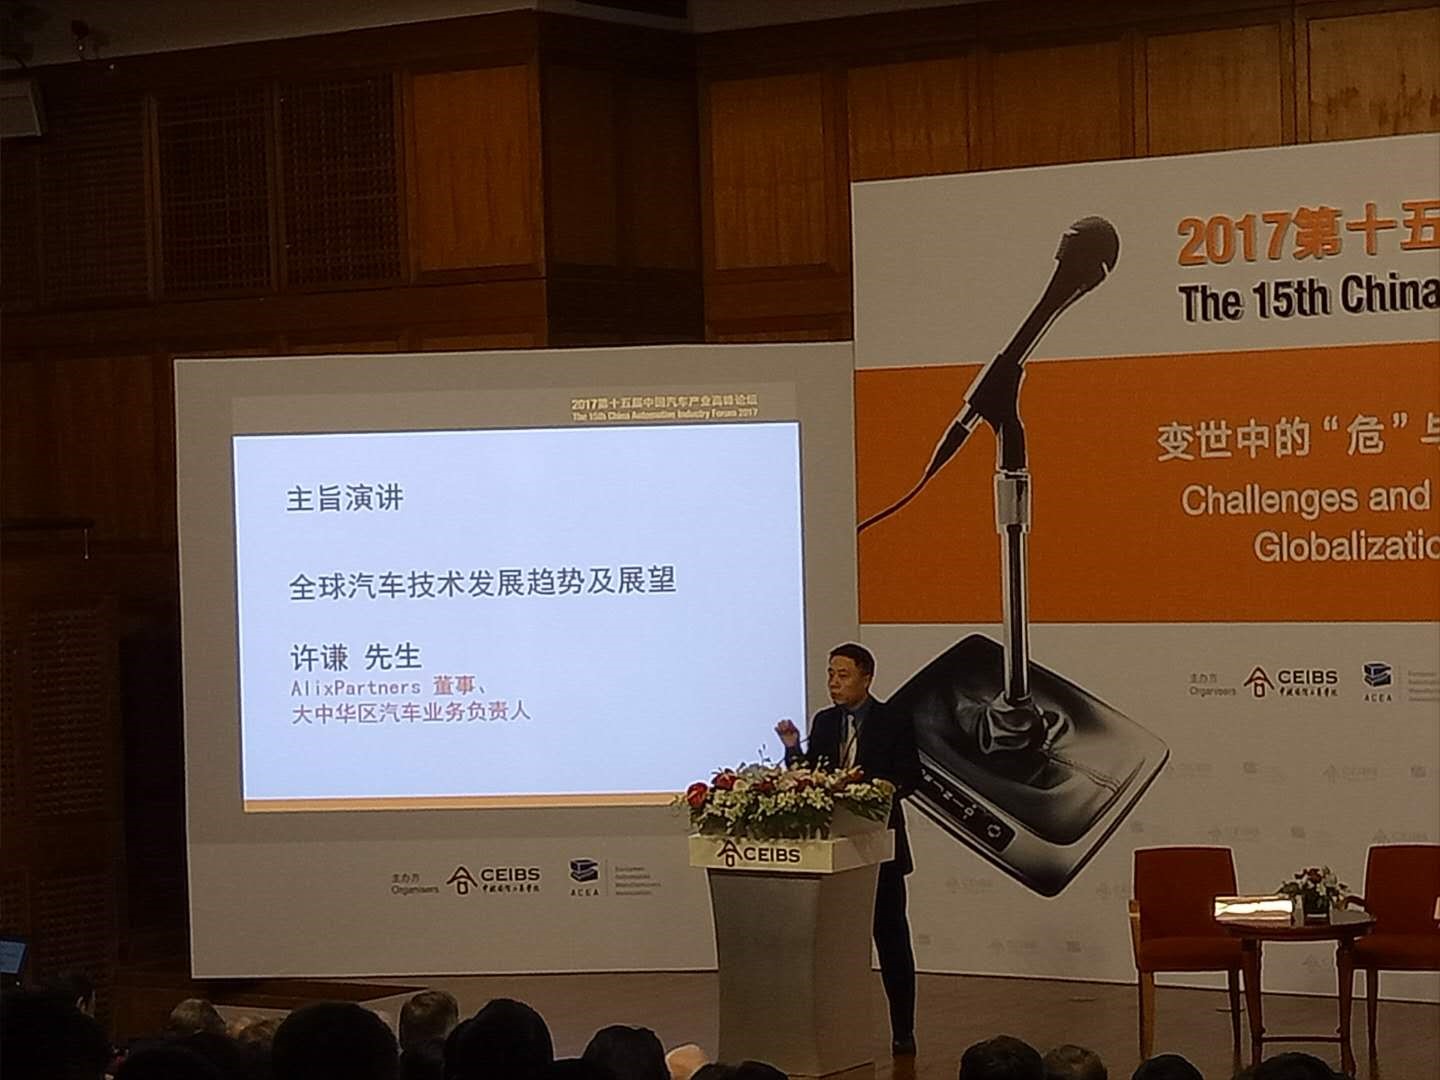 Mr. Xu Qian, Director of AlixPartners, Head of Automotive Practice for Greater China spoke about development trends and outlook in global automotive technologies.